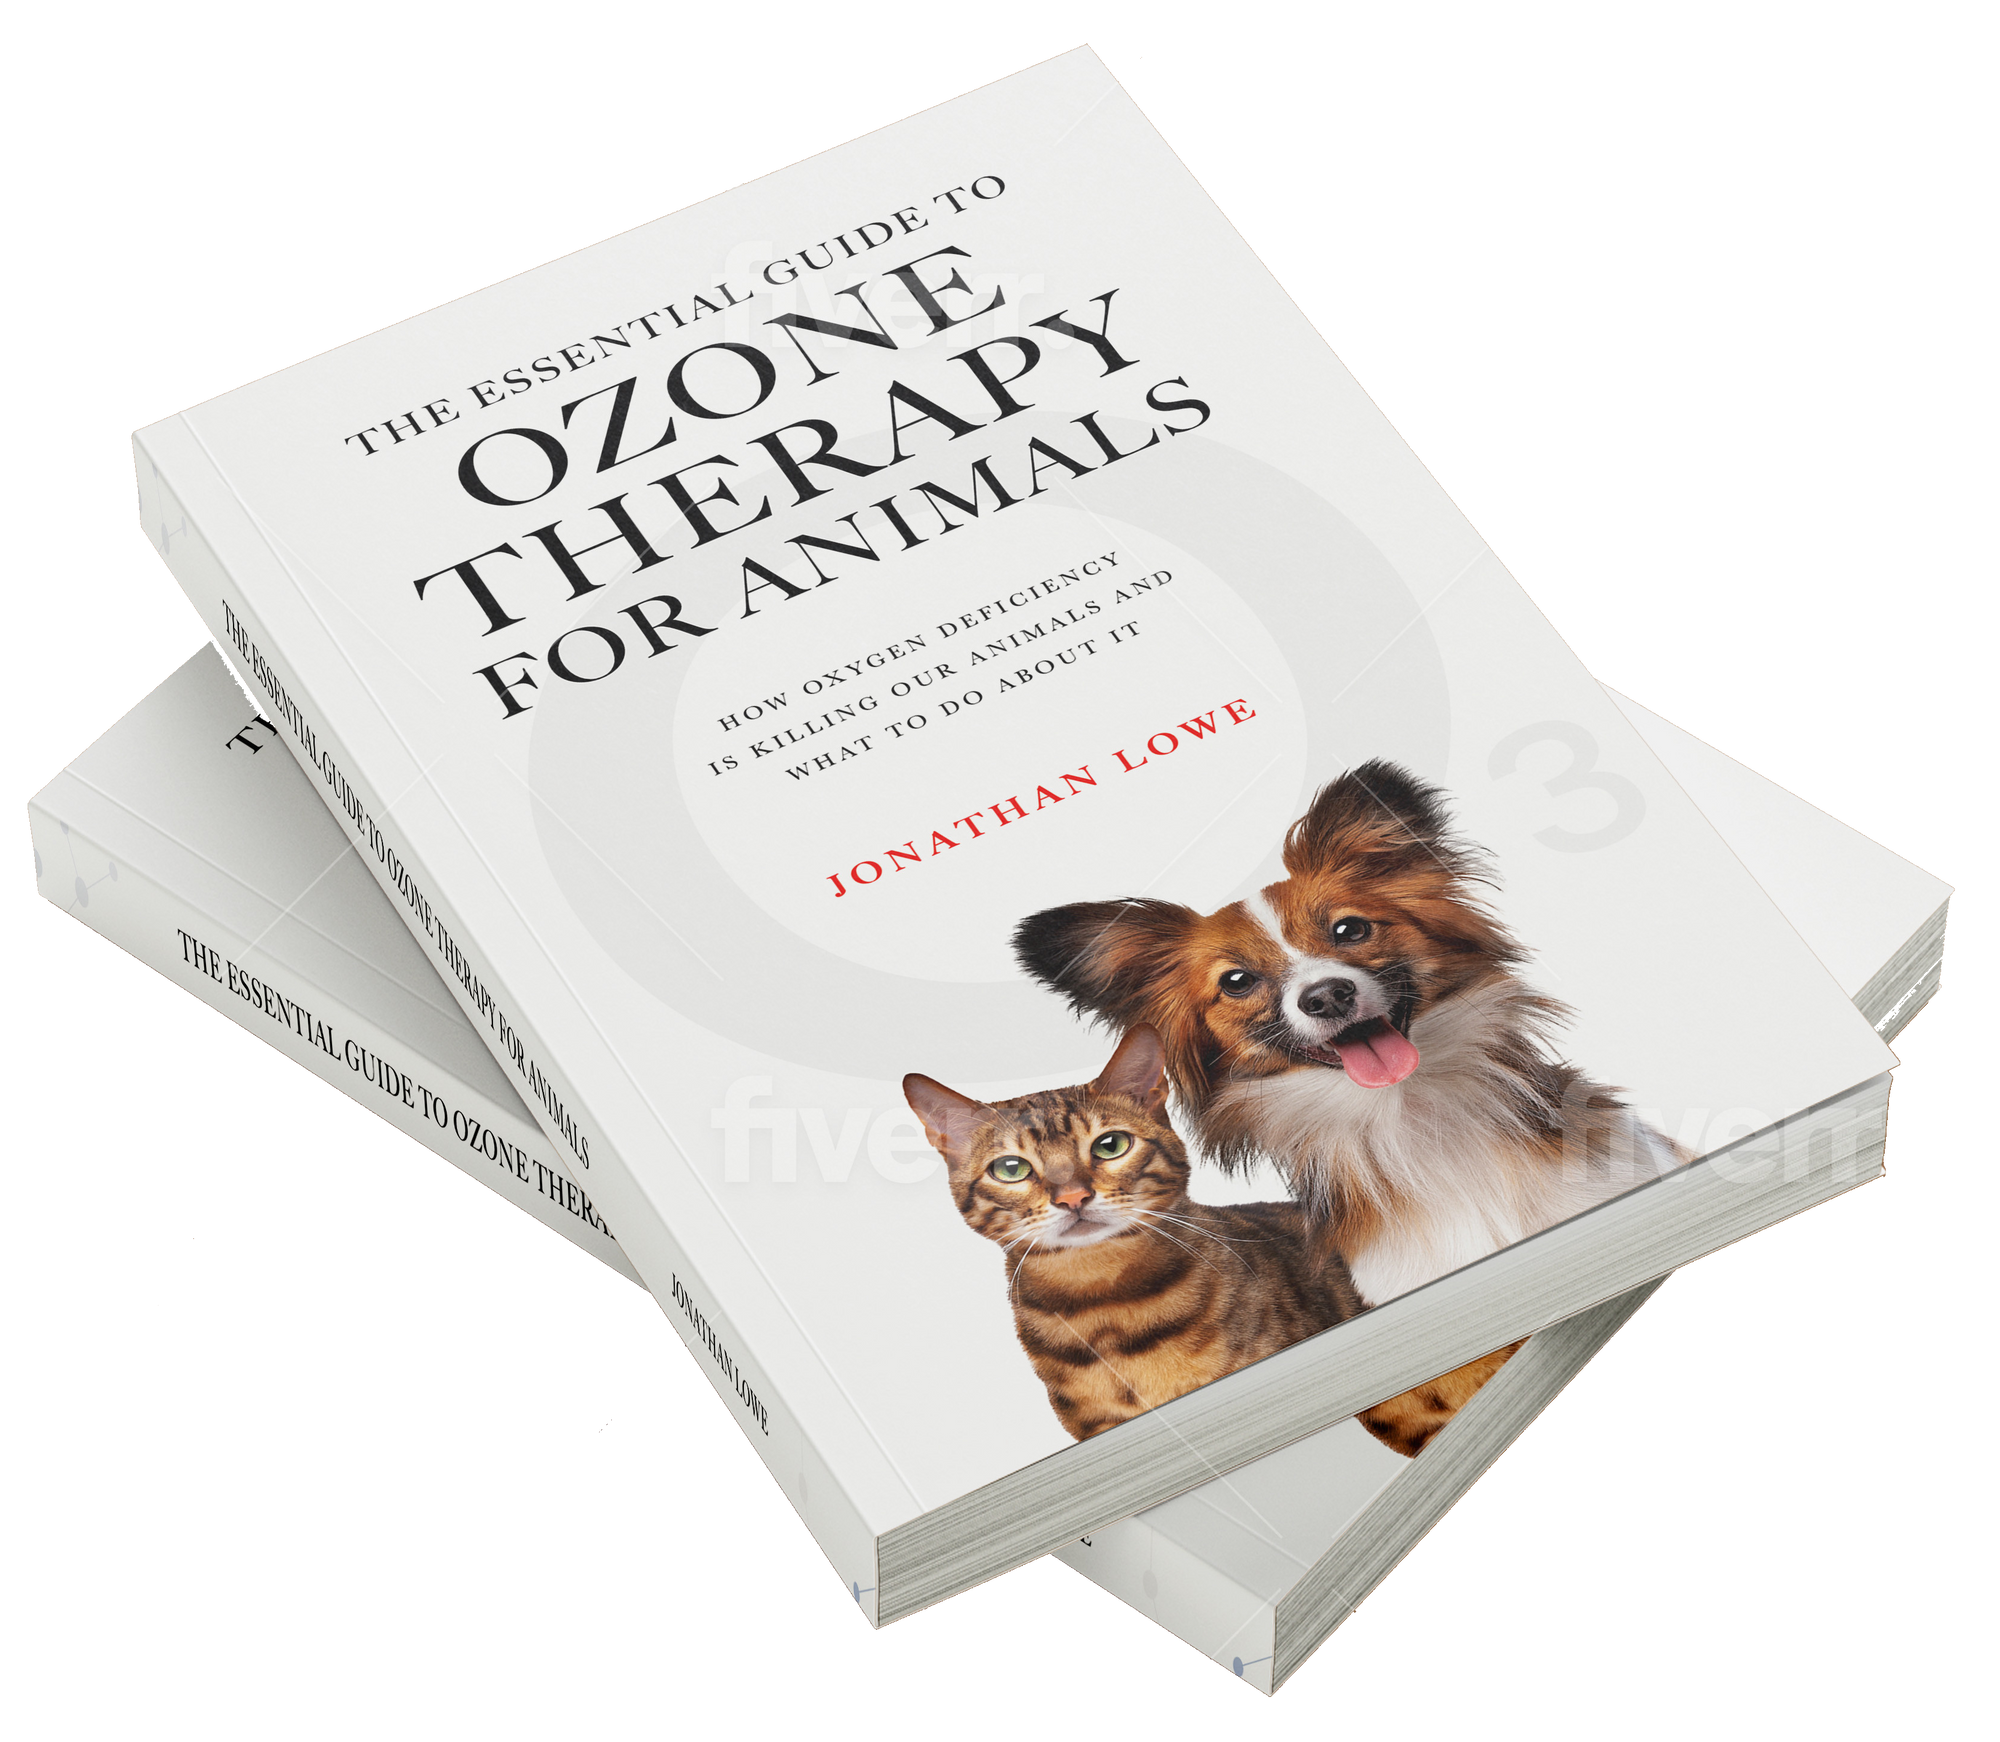 The Essential Guide to Ozone Therapy for Animals